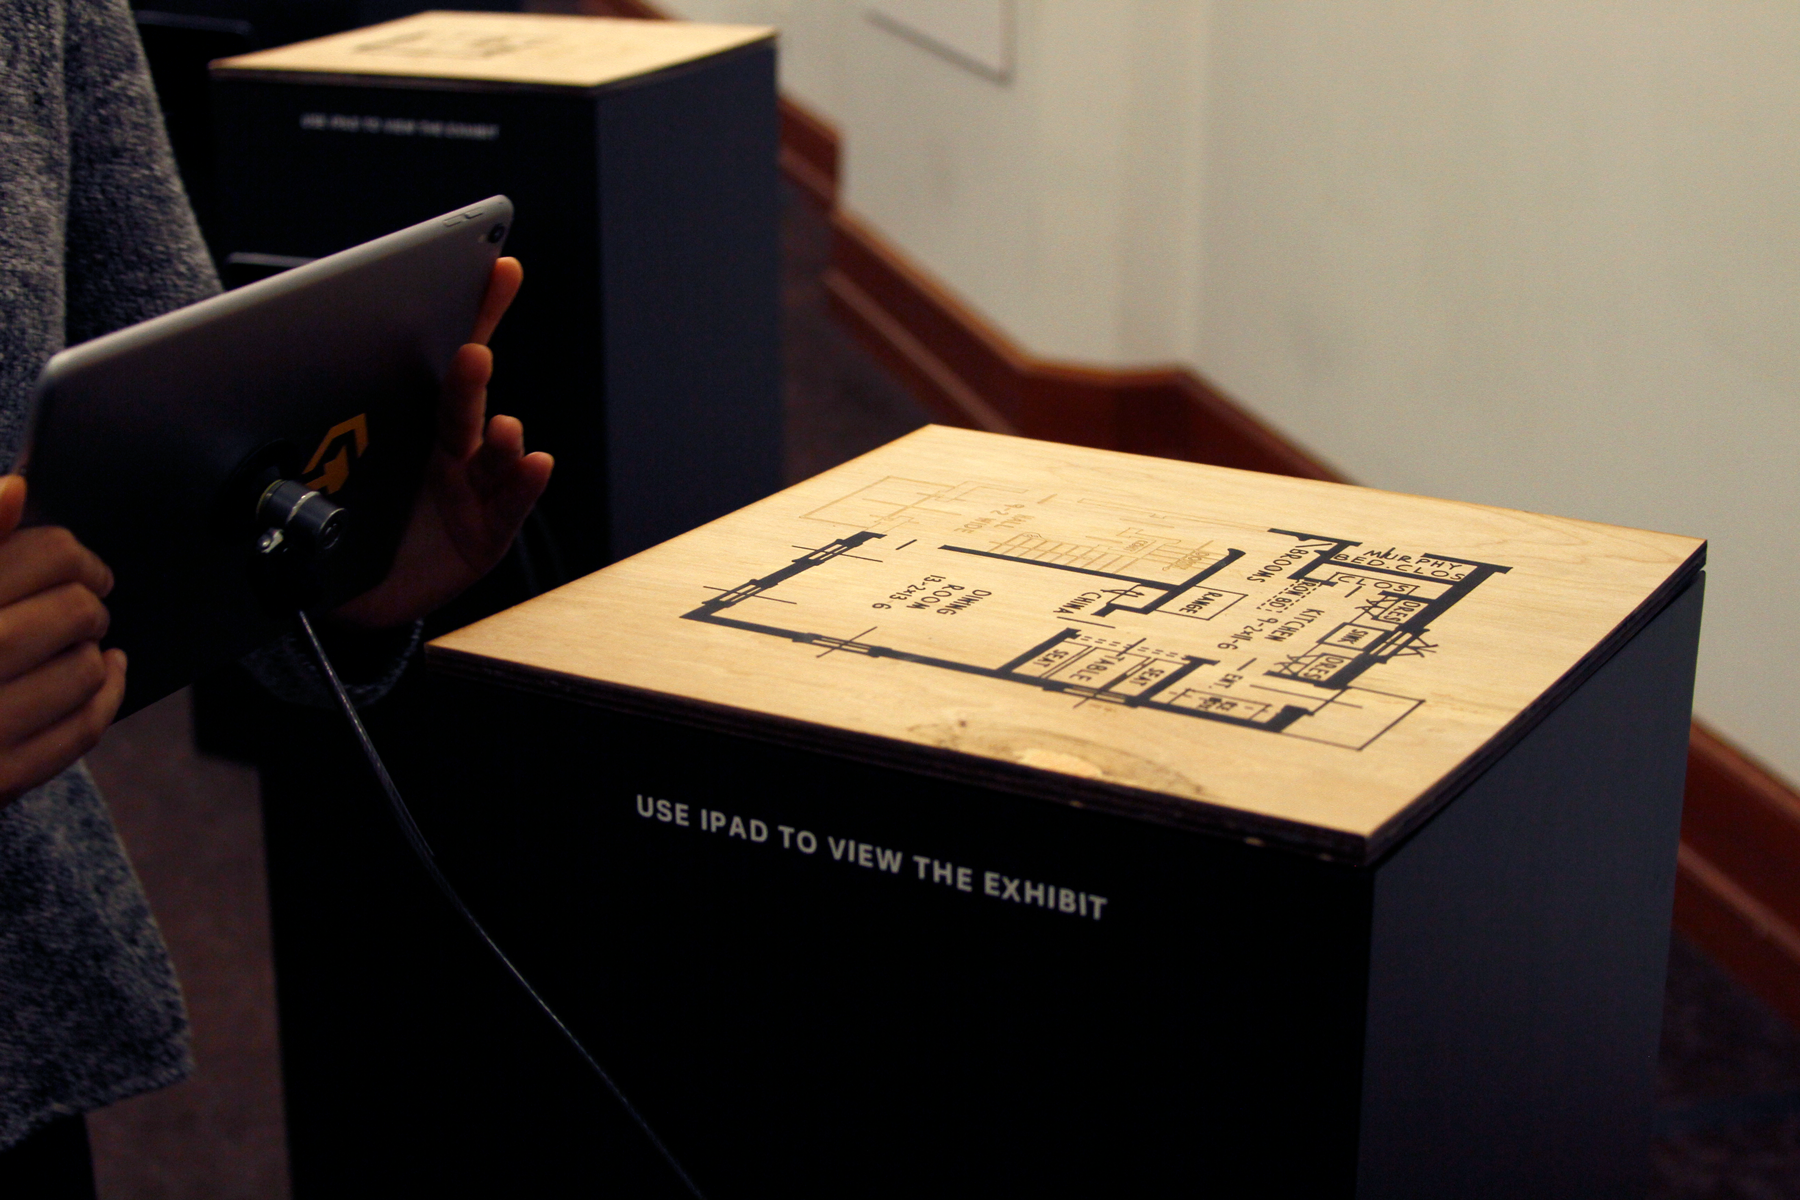 Photo showing a scaled floor plan on a wooden surface, on top of a black plinth. They served as the visual tag to activate the augmented reality experience.